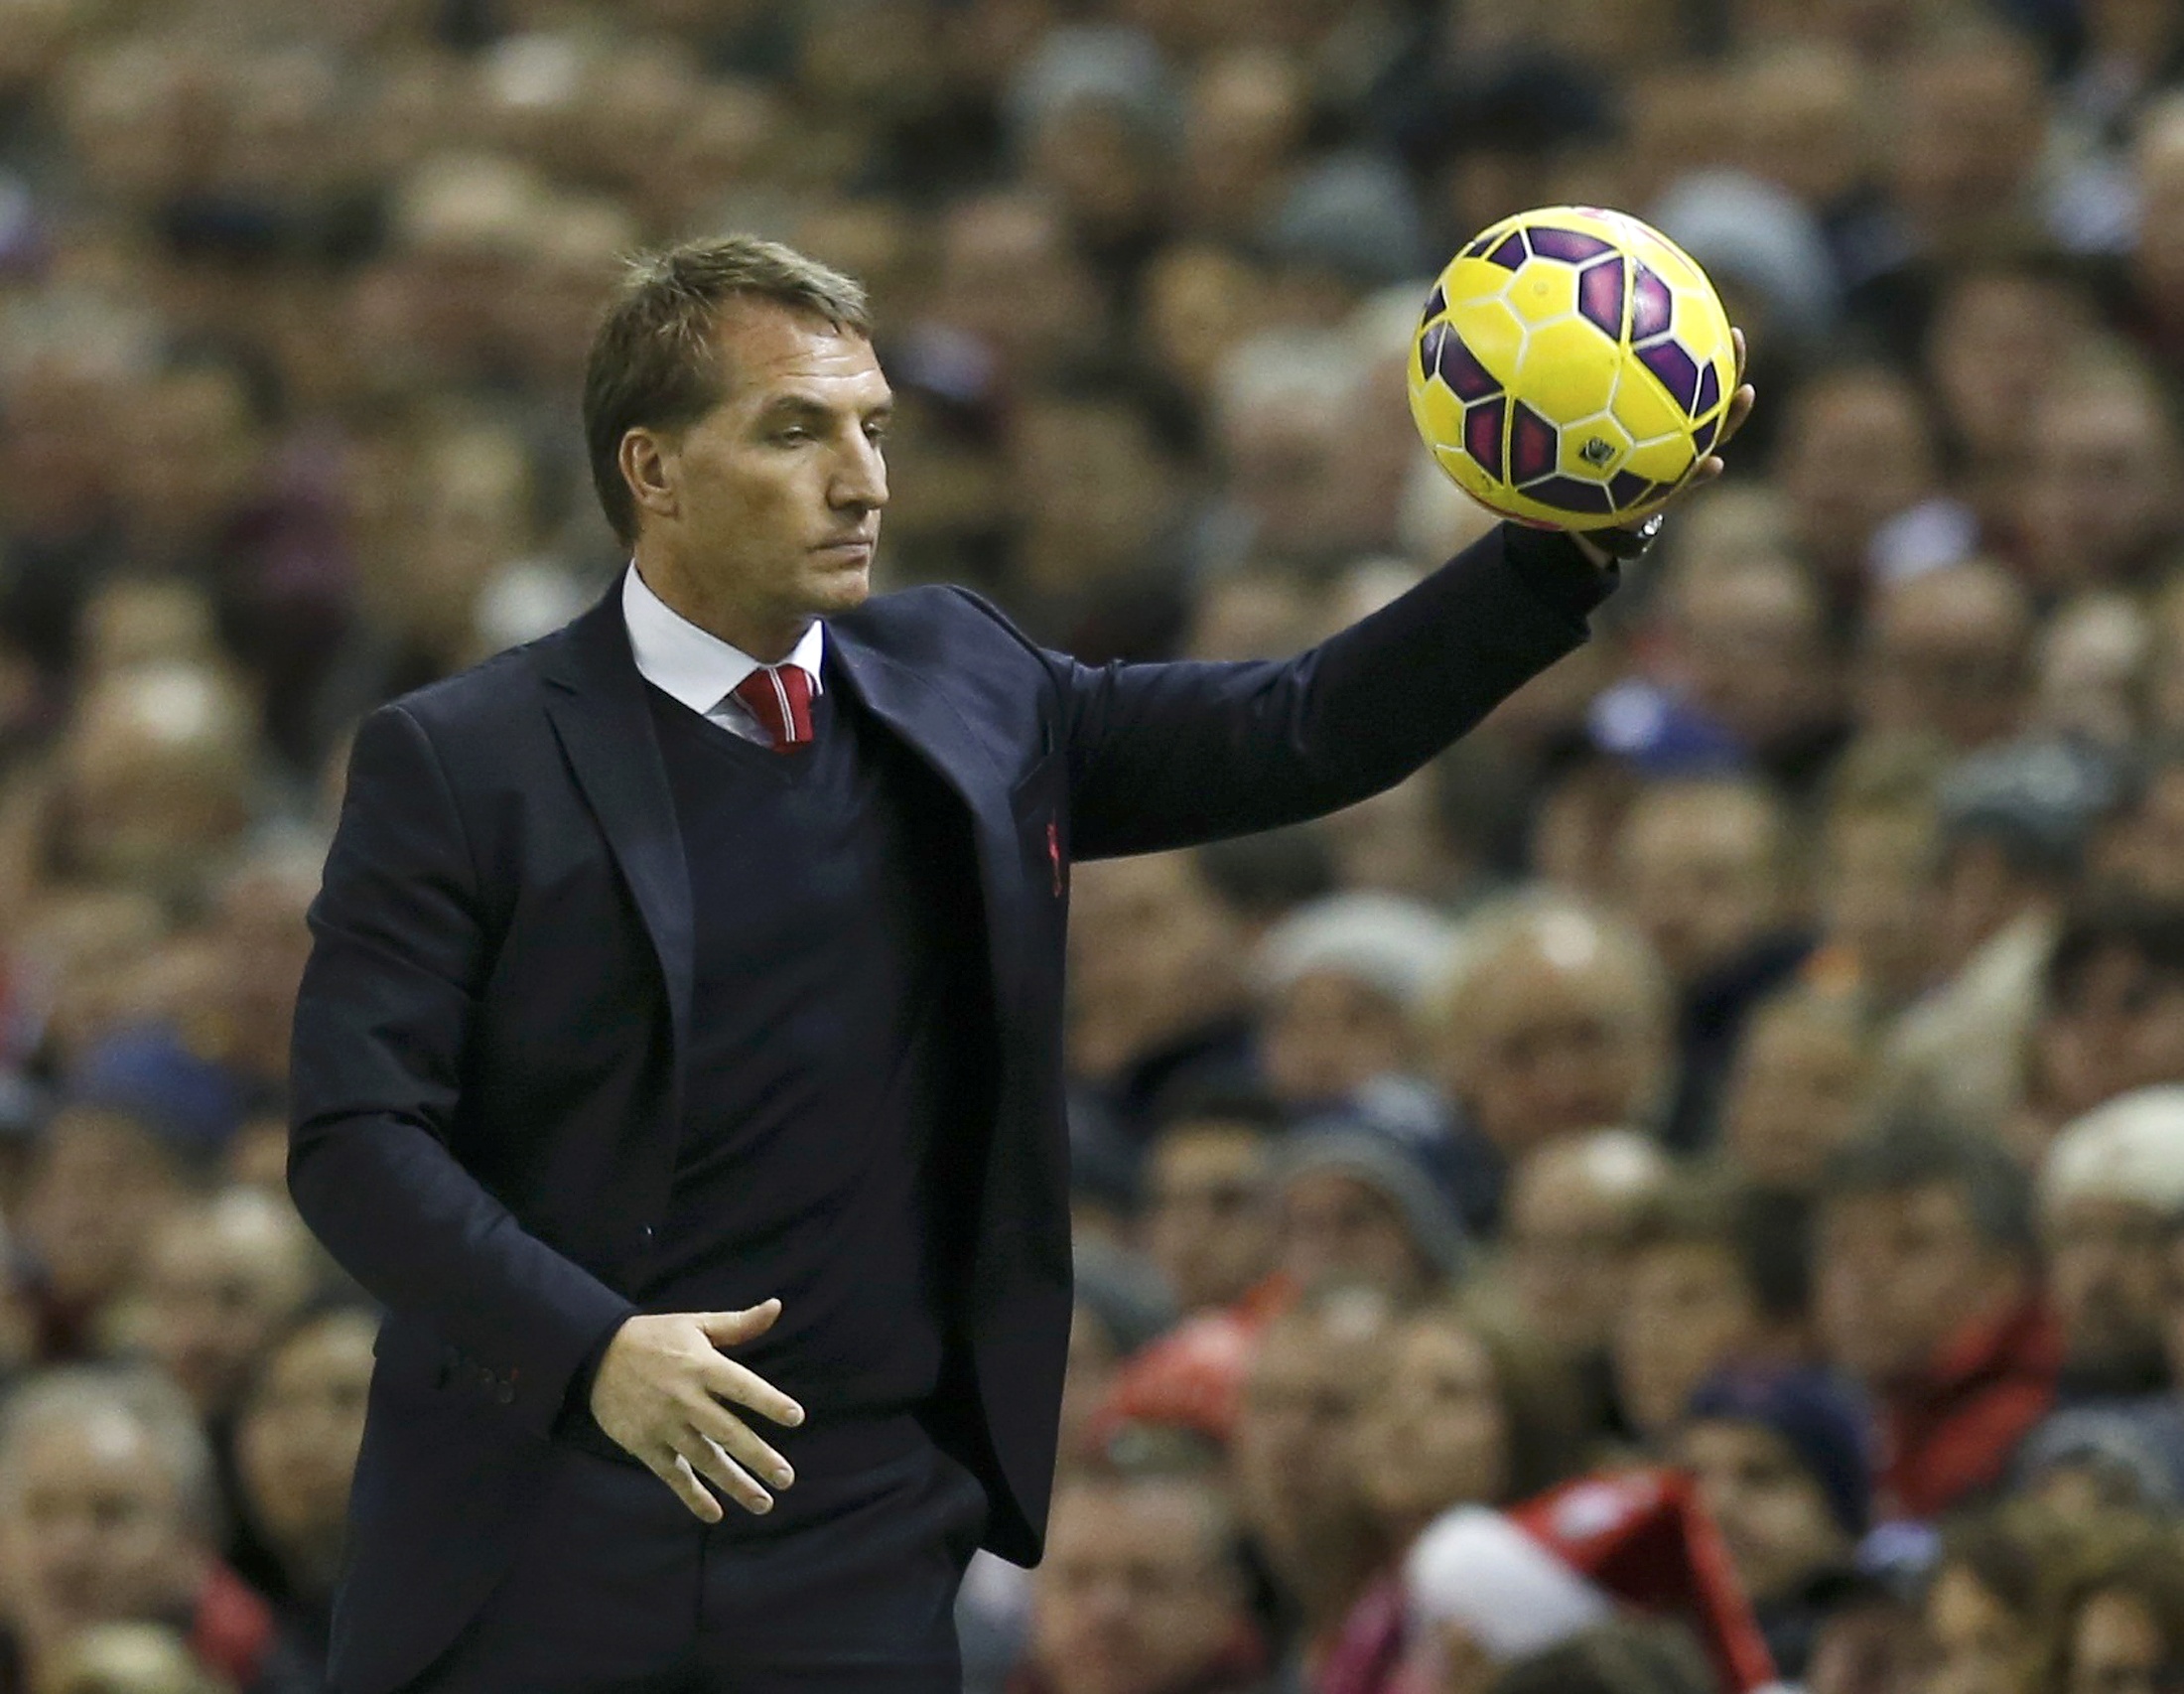 Liverpool manager Brendan Rodgers catches the ball during their English Premier League soccer match against Arsenal at Anfield in Liverpool